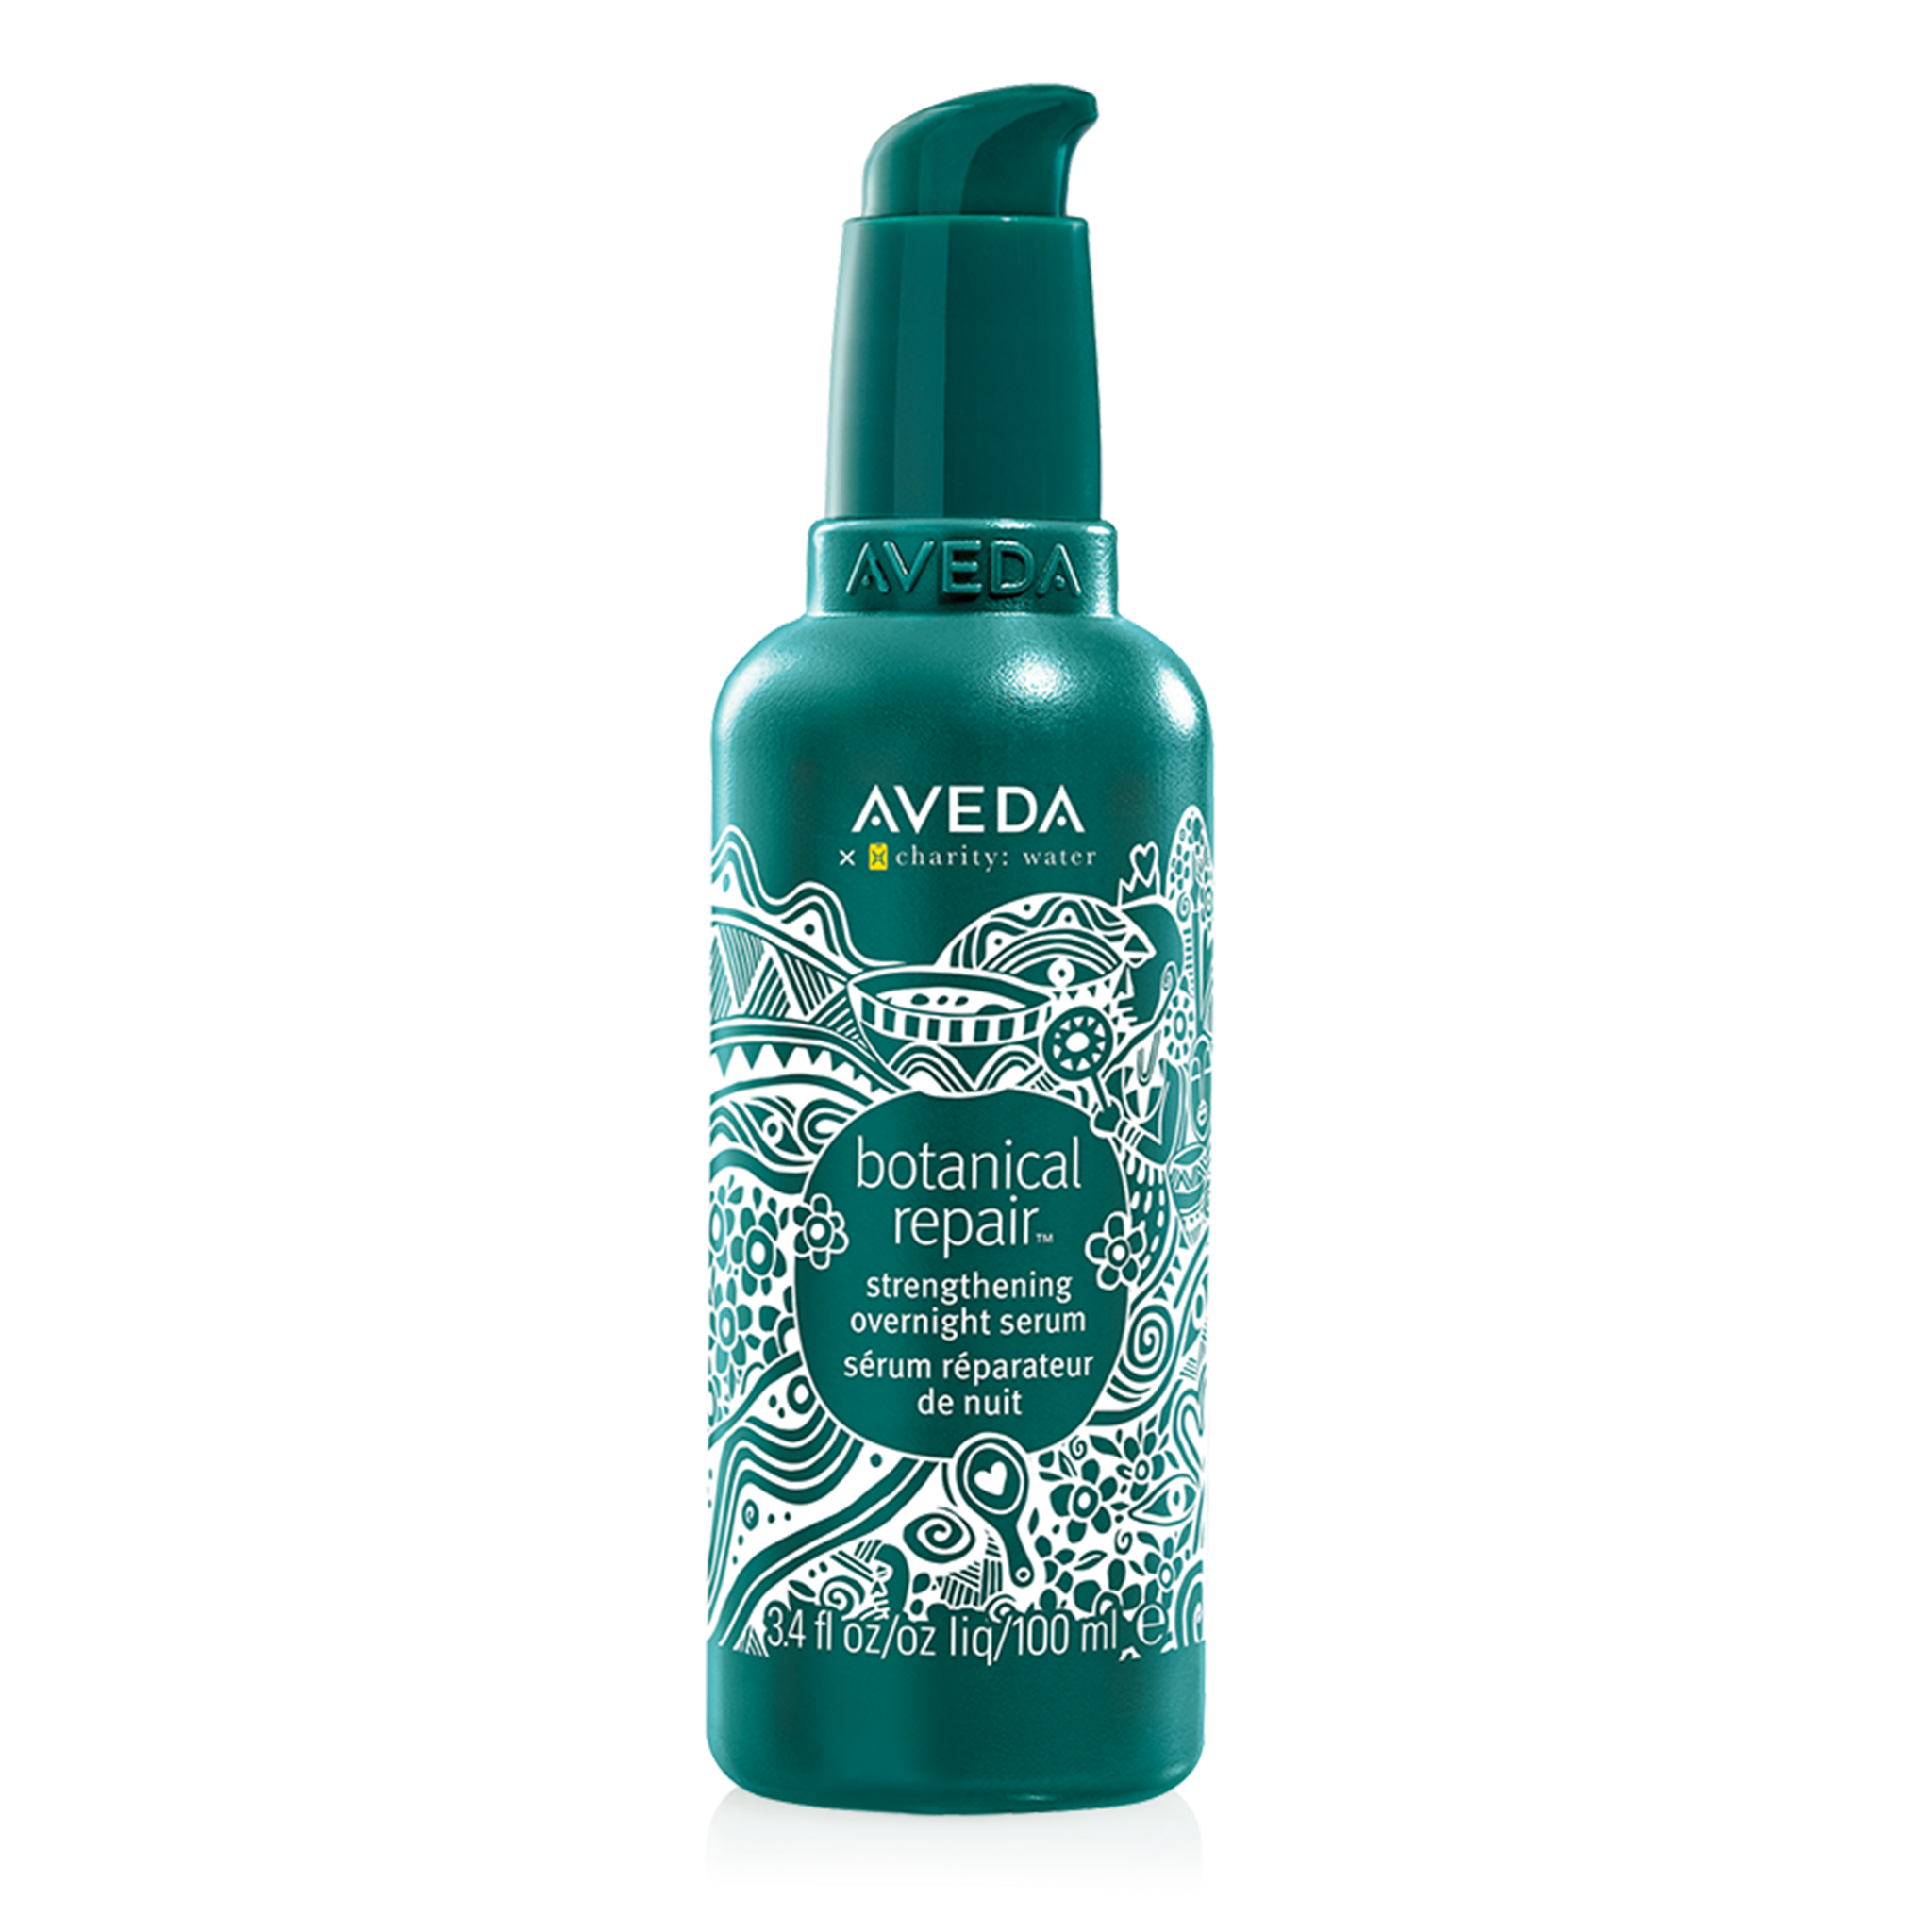 Aveda Earth Month Limited Edition Product - Botanical Repair Overnight Serum 100ml